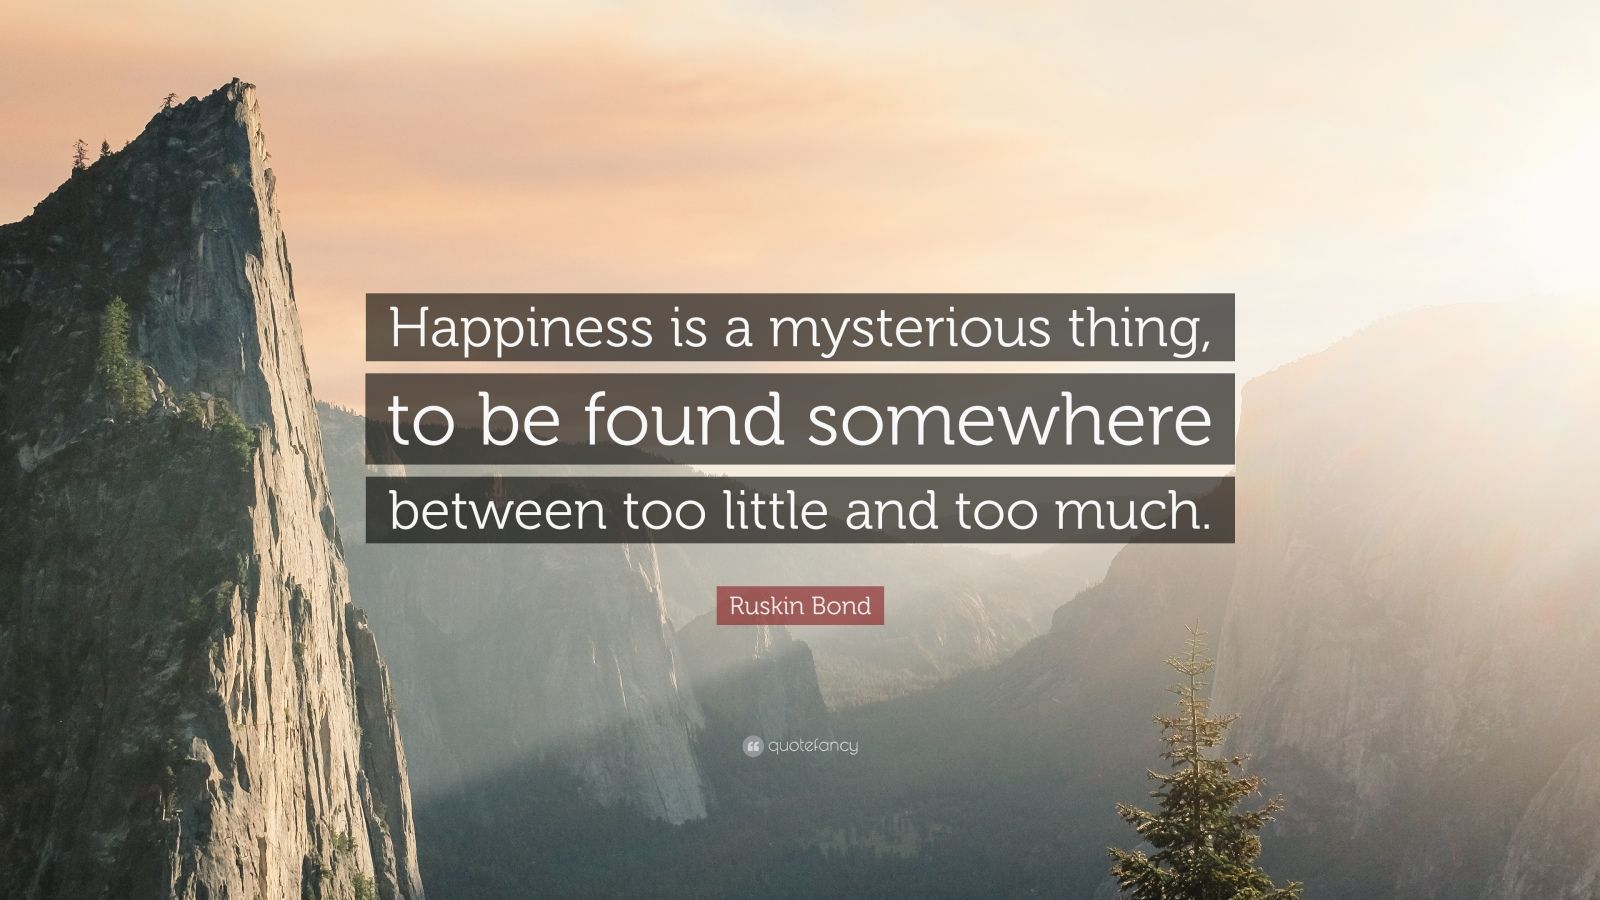 Ruskin Bond Quote: “Happiness is a mysterious thing, to be found ...